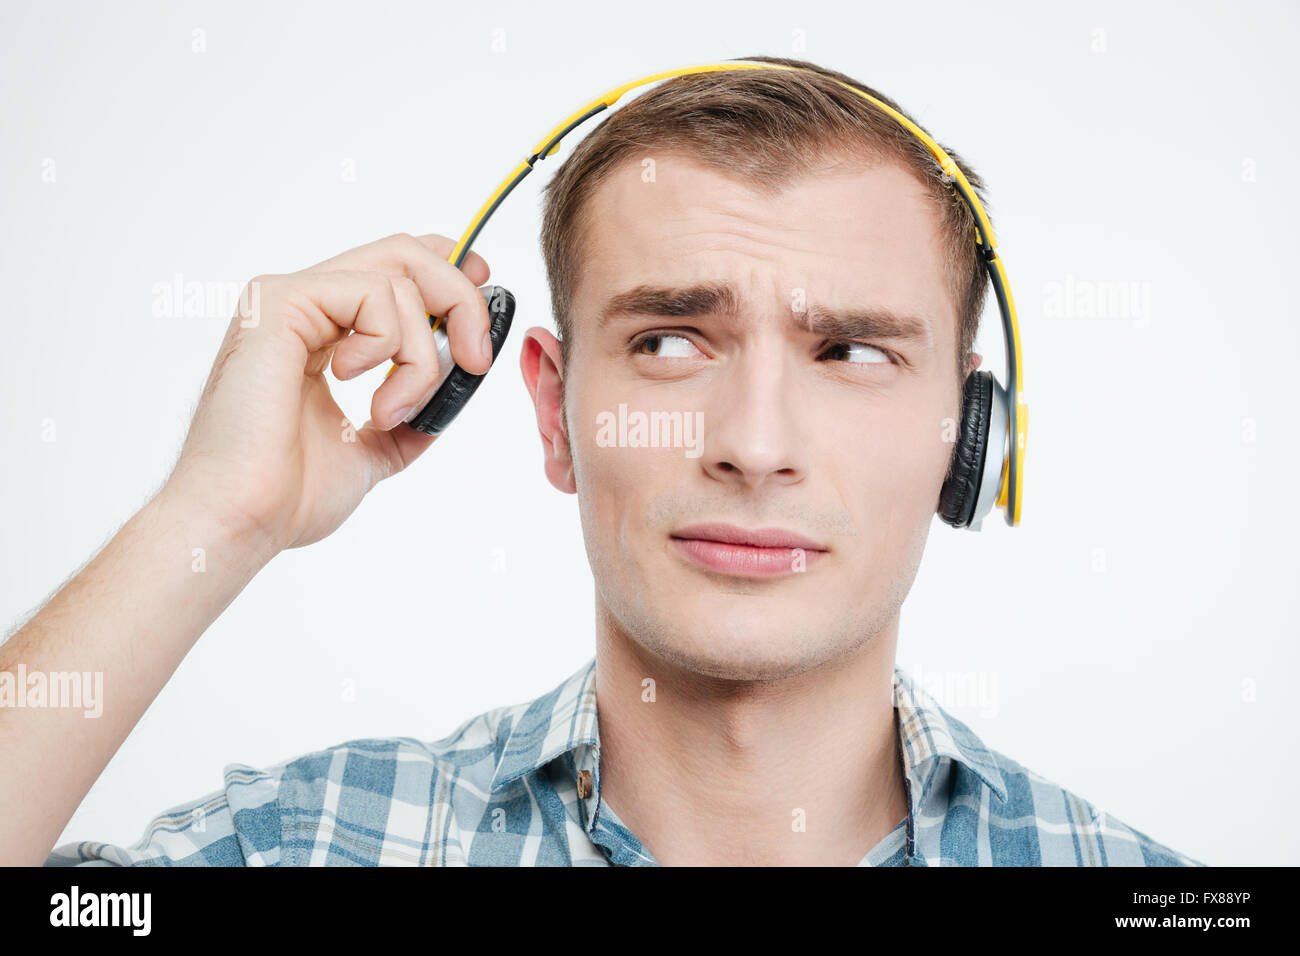 Unhappy handsome young man taking off headphones over white background Stock Photo